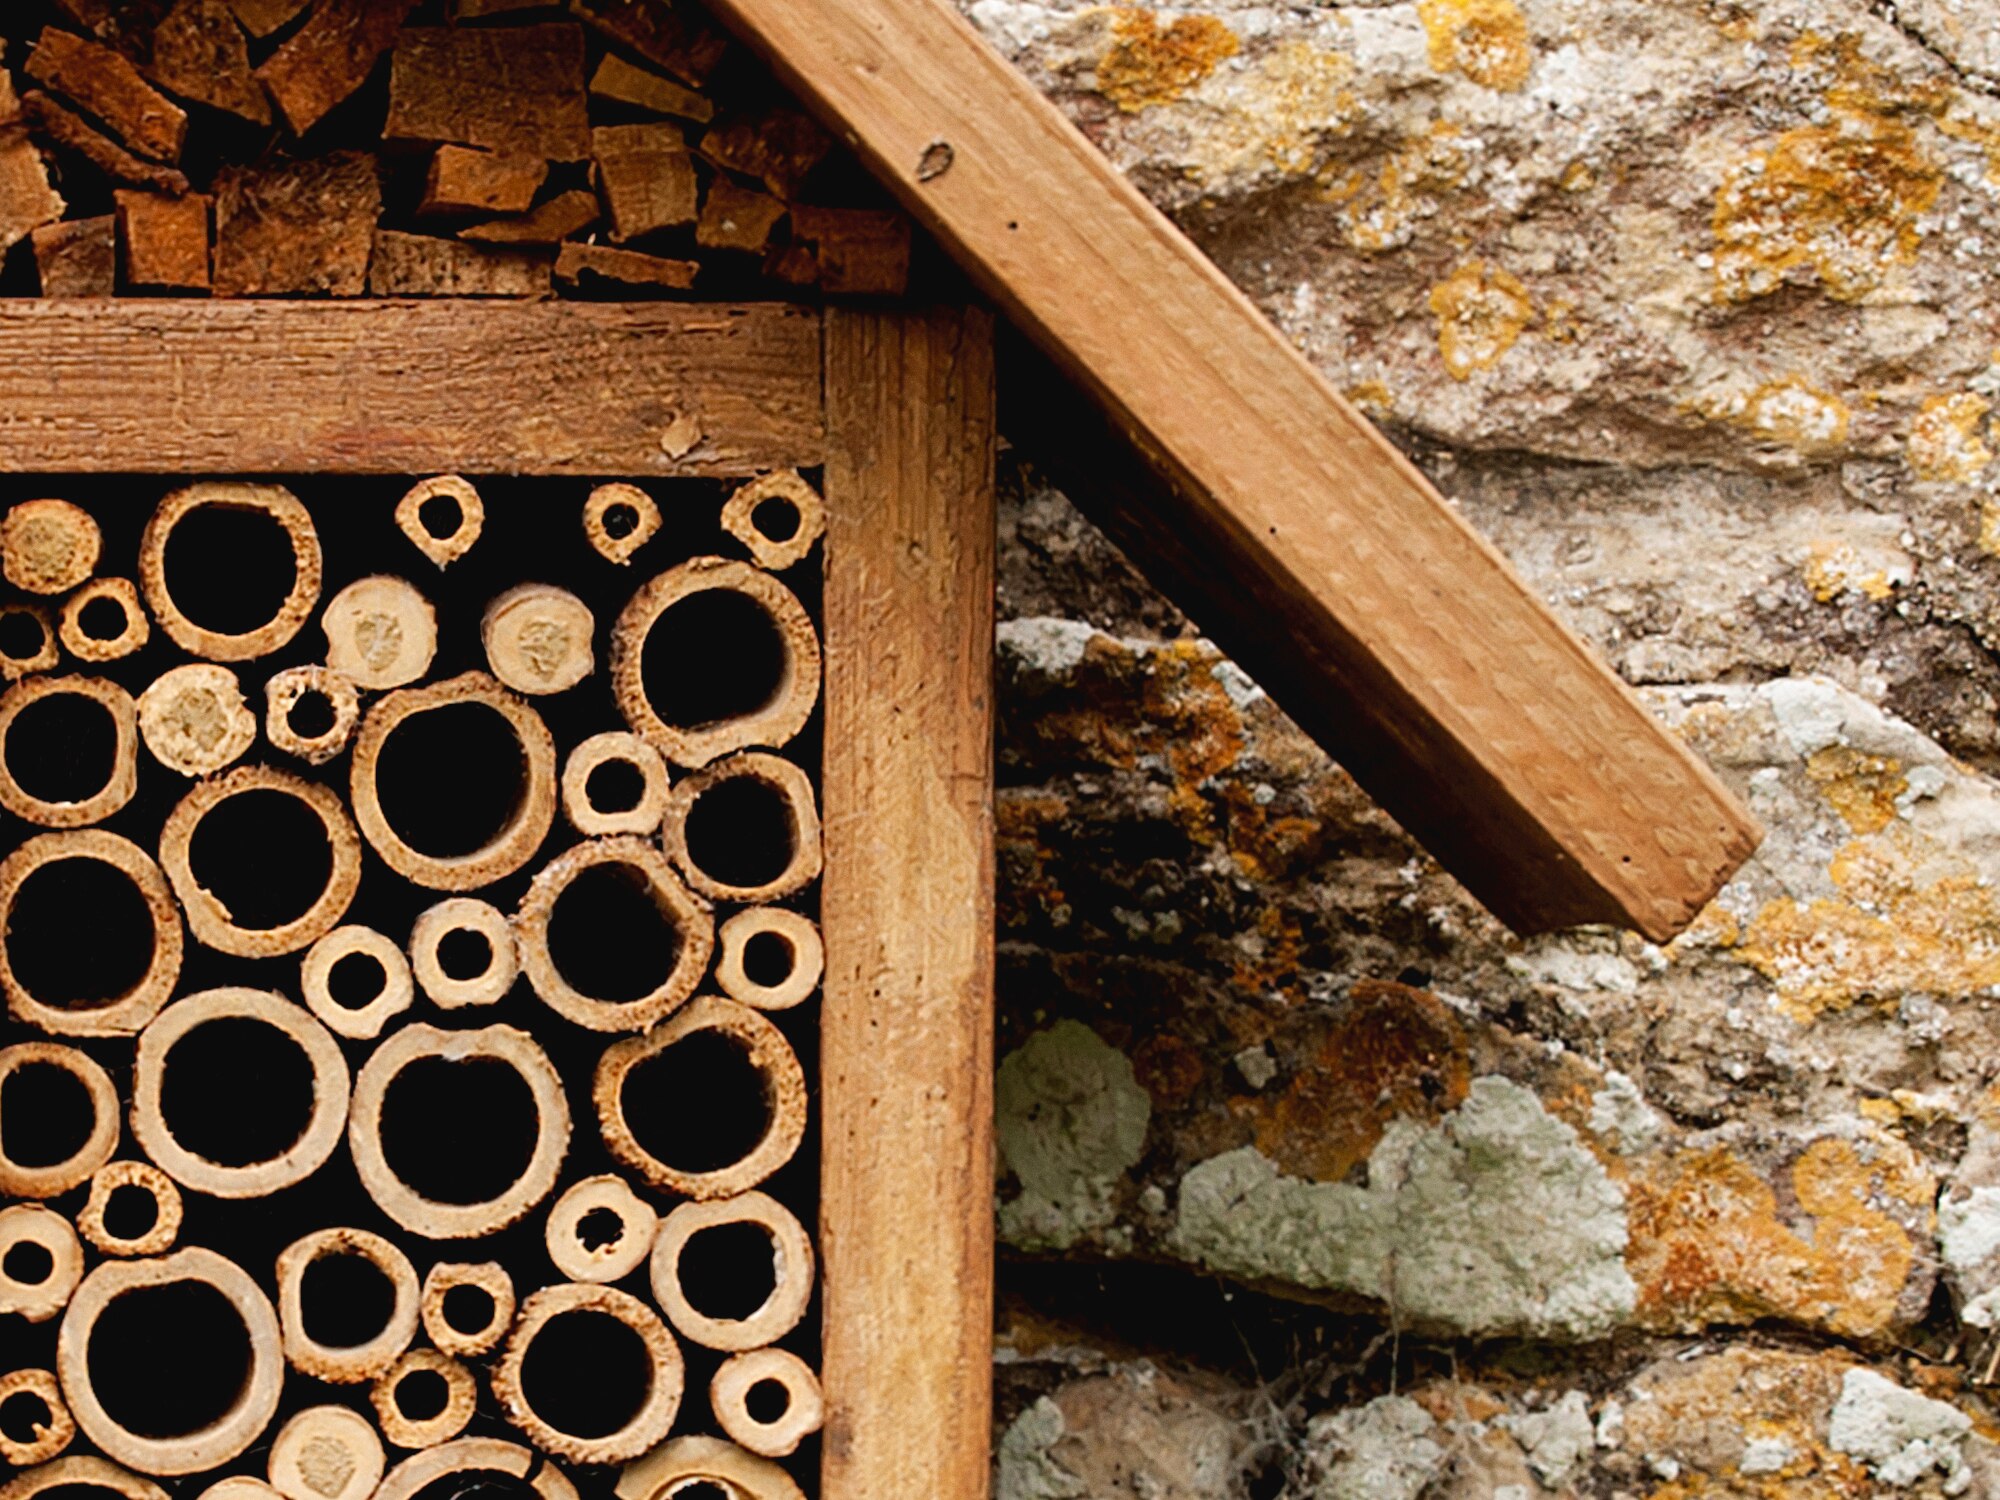 The Concierge of a bee hotel